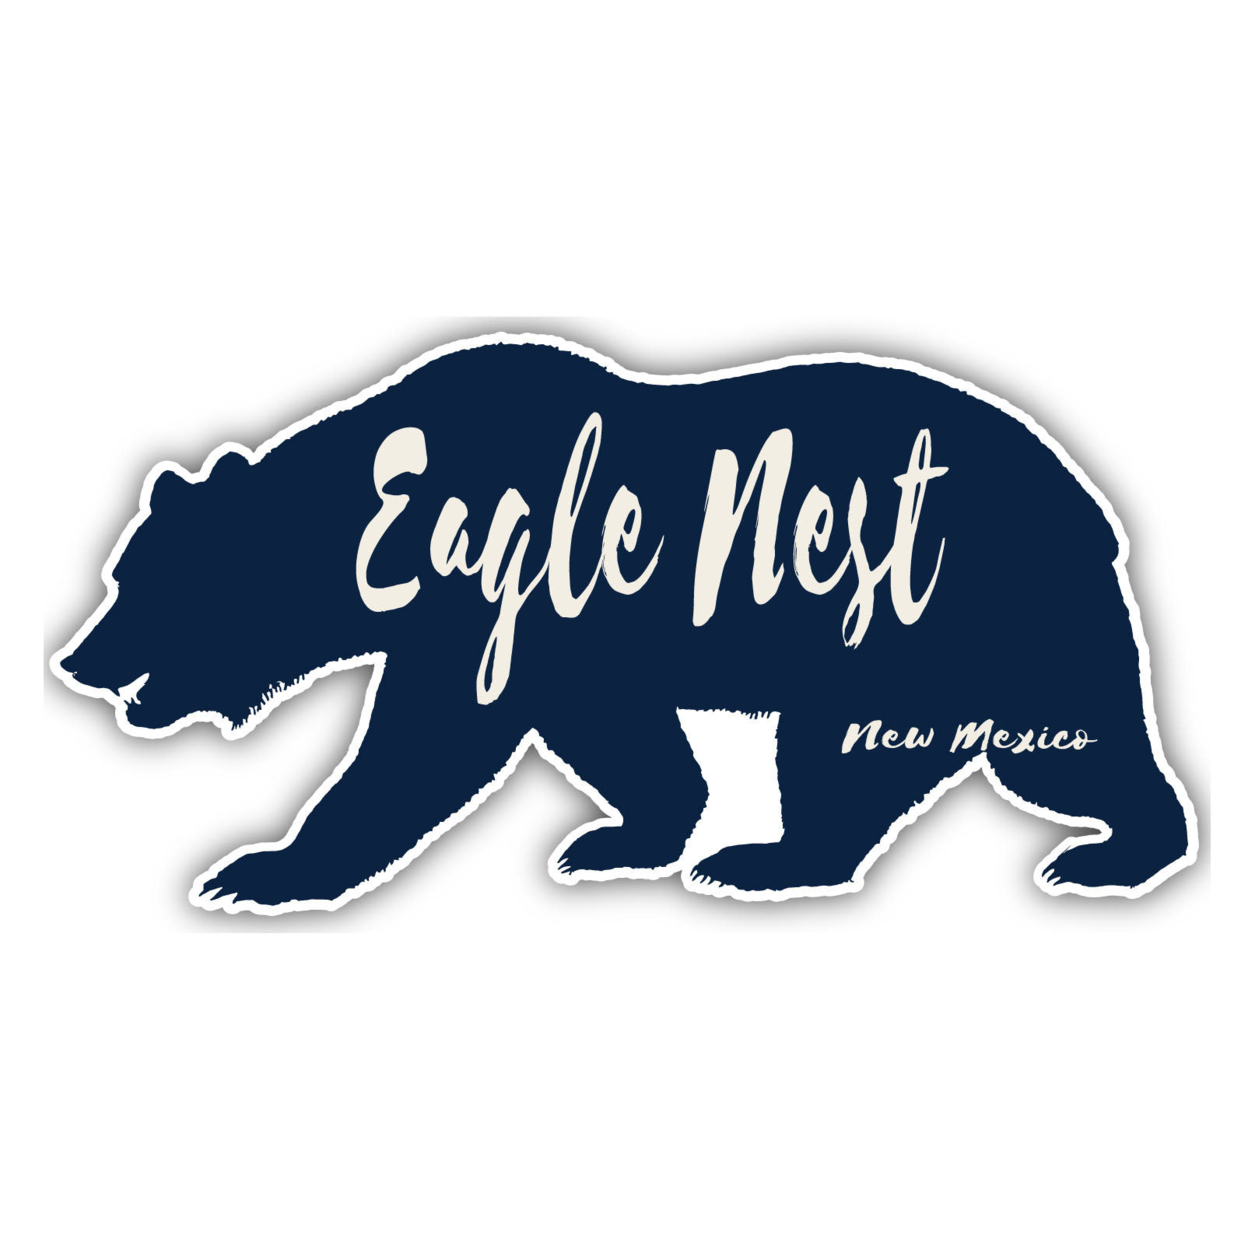 Eagle Nest New Mexico Souvenir Decorative Stickers (Choose Theme And Size) - Single Unit, 6-Inch, Great Outdoors